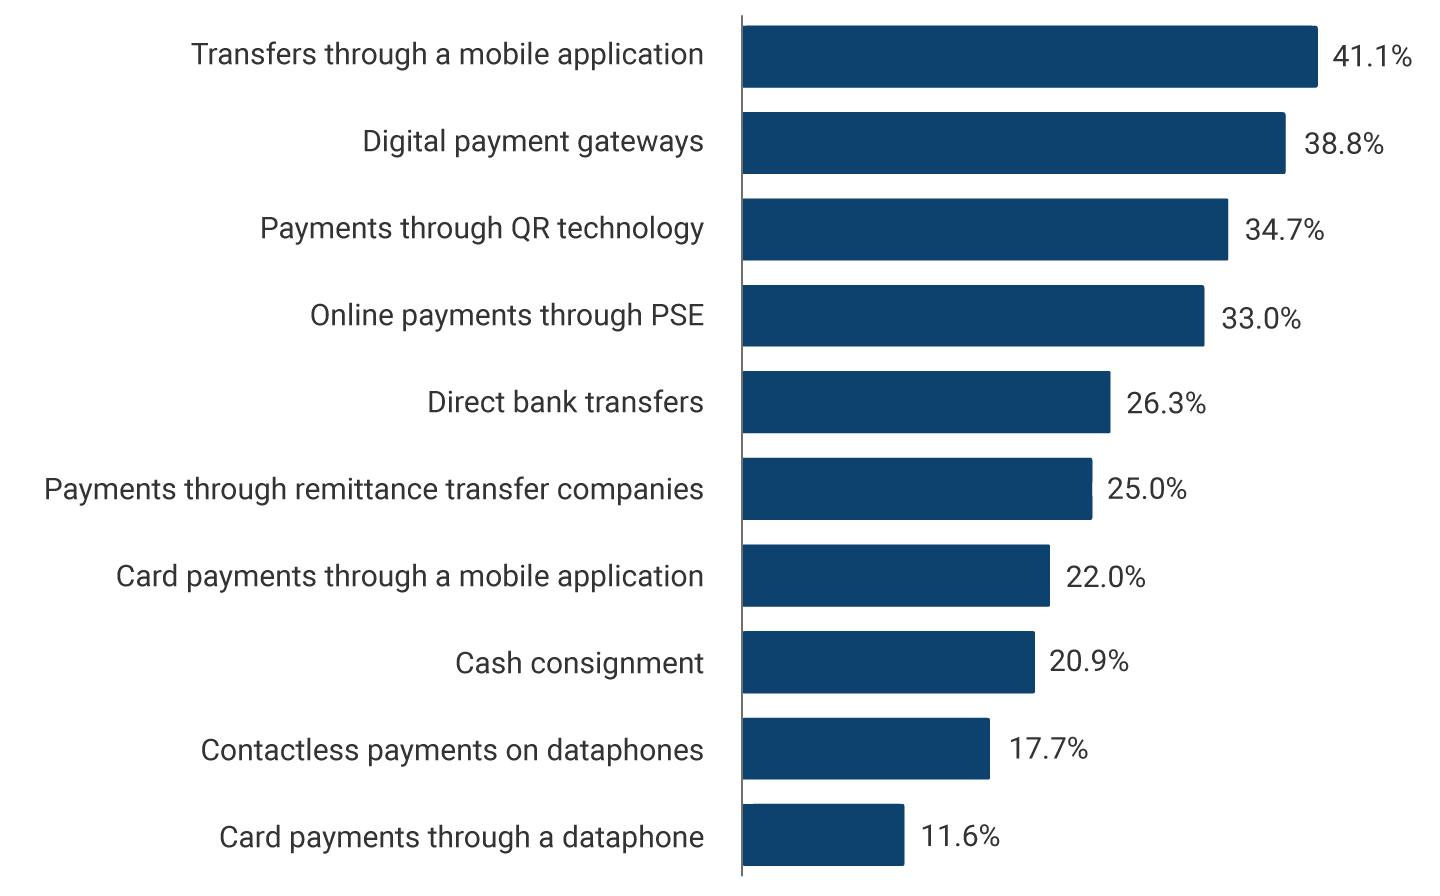 Transfers through mobile application: 41.1%. Digital payment gateways: 38.8%. Payments using QR technology: 34.7%. Online payments through PSE: 33.0%. Direct bank transfers: 26.3%. Payments through remittance transfer companies: 25.0%. Payments with cards through mobile application: 22.0%. Cash deposit; 20.9%. Contactless payments on dataphones: 17.7%. Card payments via dataphone: 11.6%.